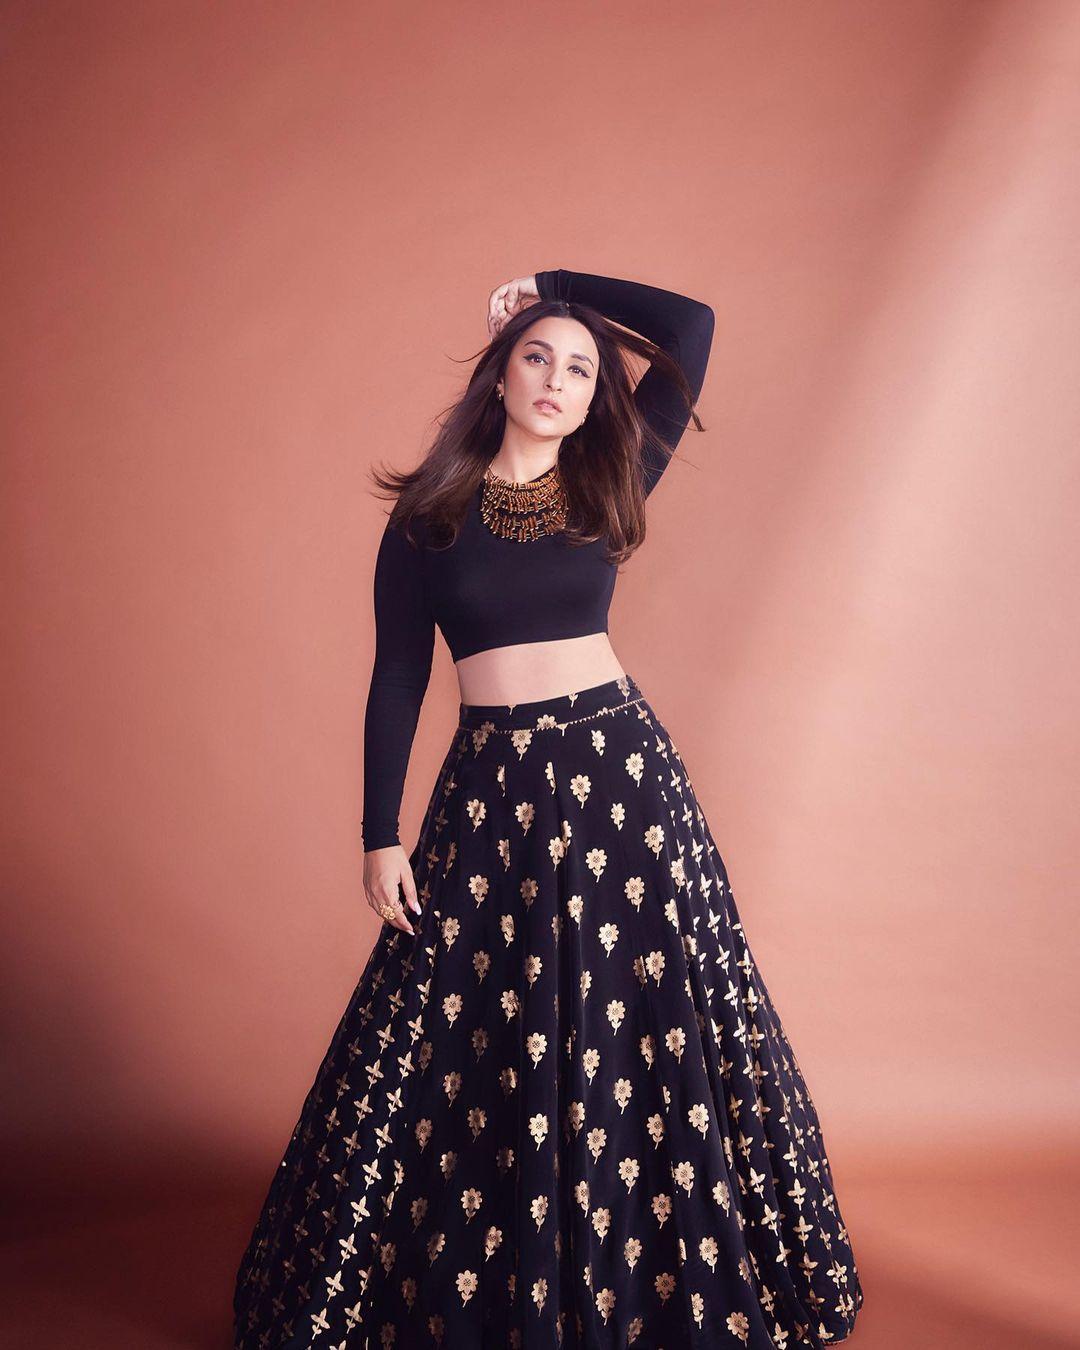 Parineeti Chopra elegantly chose a striking black crop top, skillfully coordinating it with a matching long skirt adorned with exquisite golden embroidery. The actress's fusion of Indo-Western style embodies sheer beauty